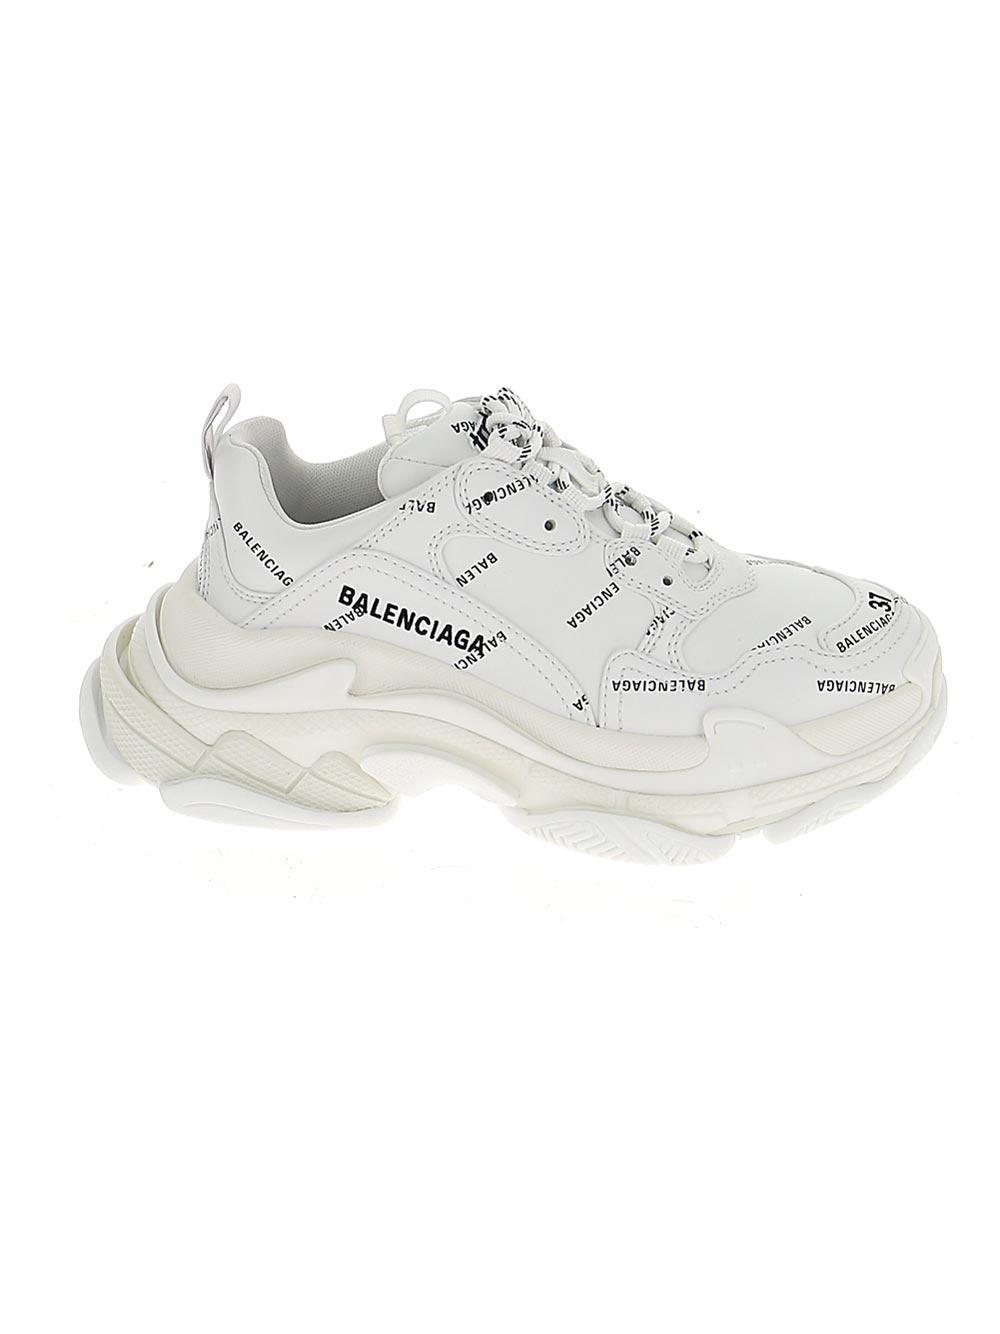 Balenciaga Synthetic Triple S Sneakers in White - Save 13% - Lyst